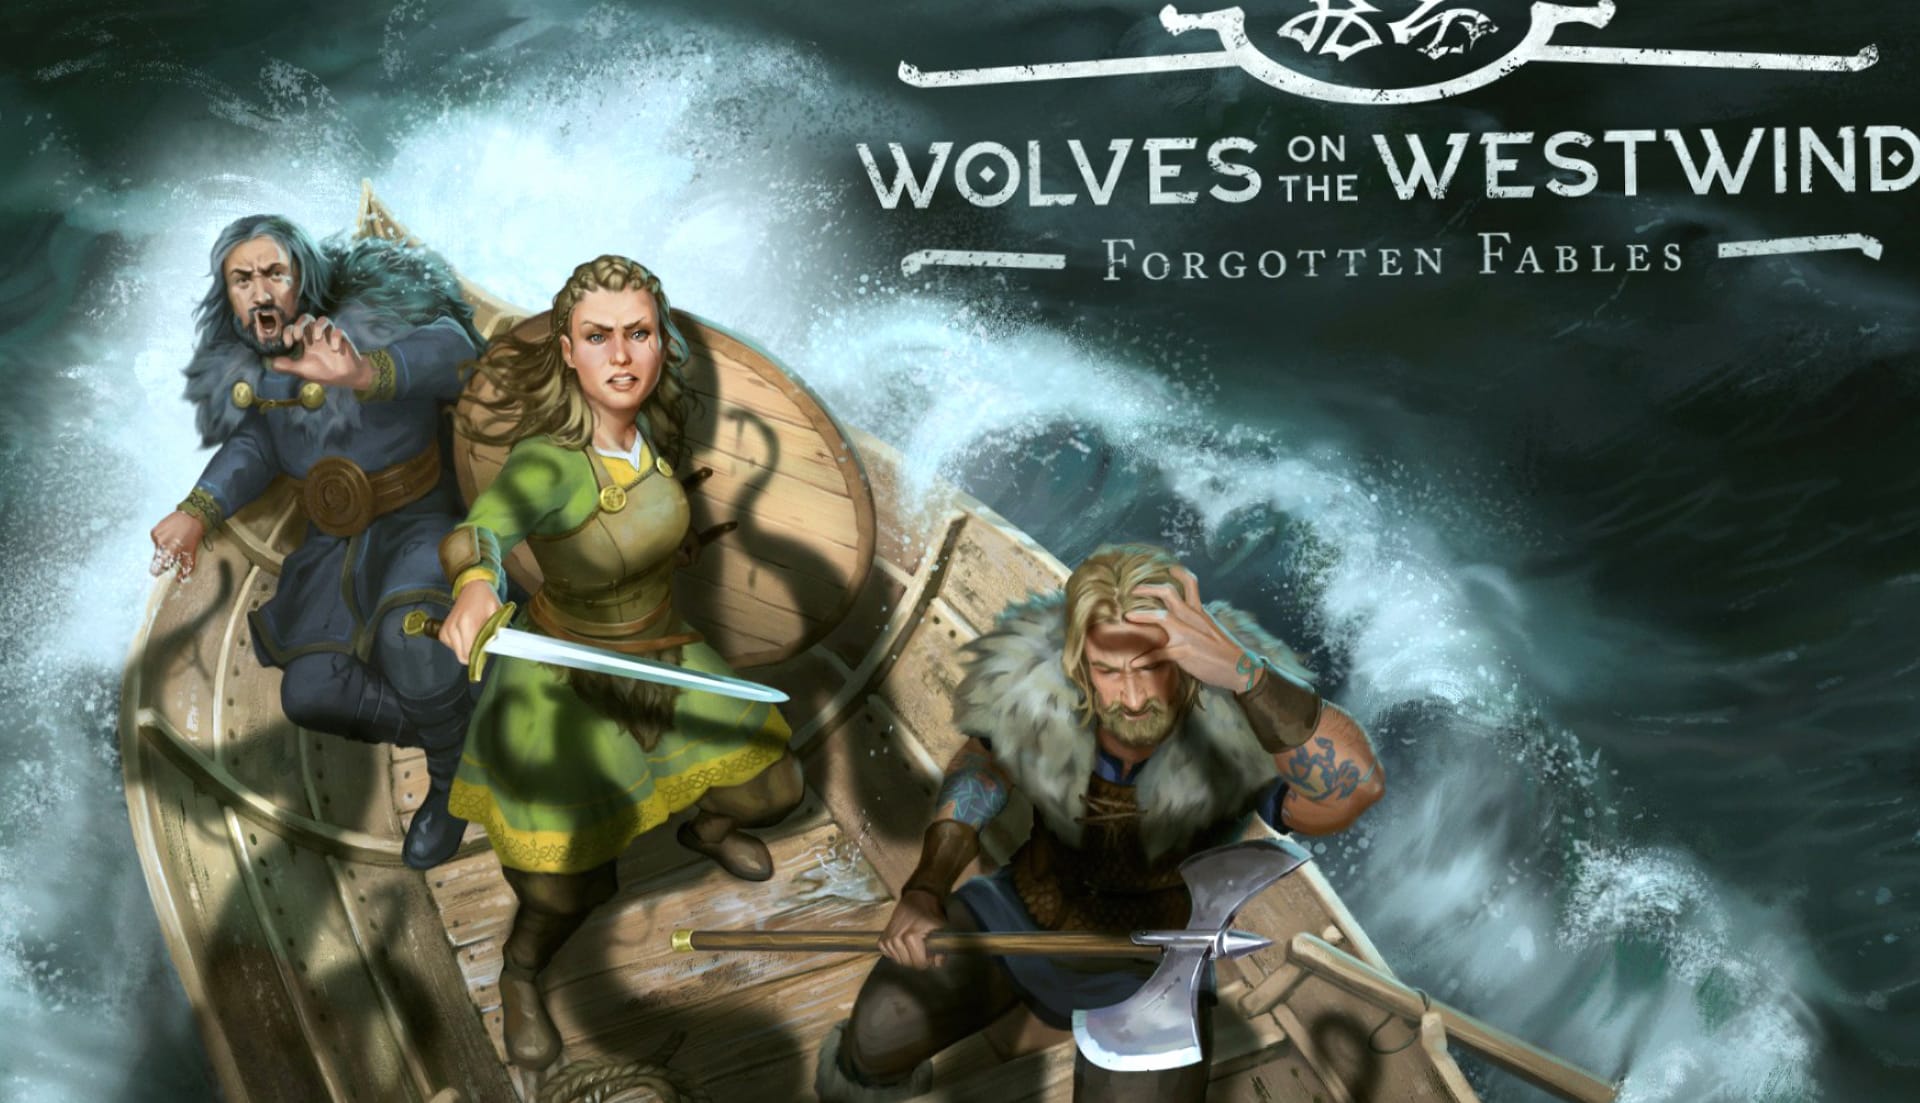 Forgotten Fables Wolves on the Westwind wallpapers HD quality